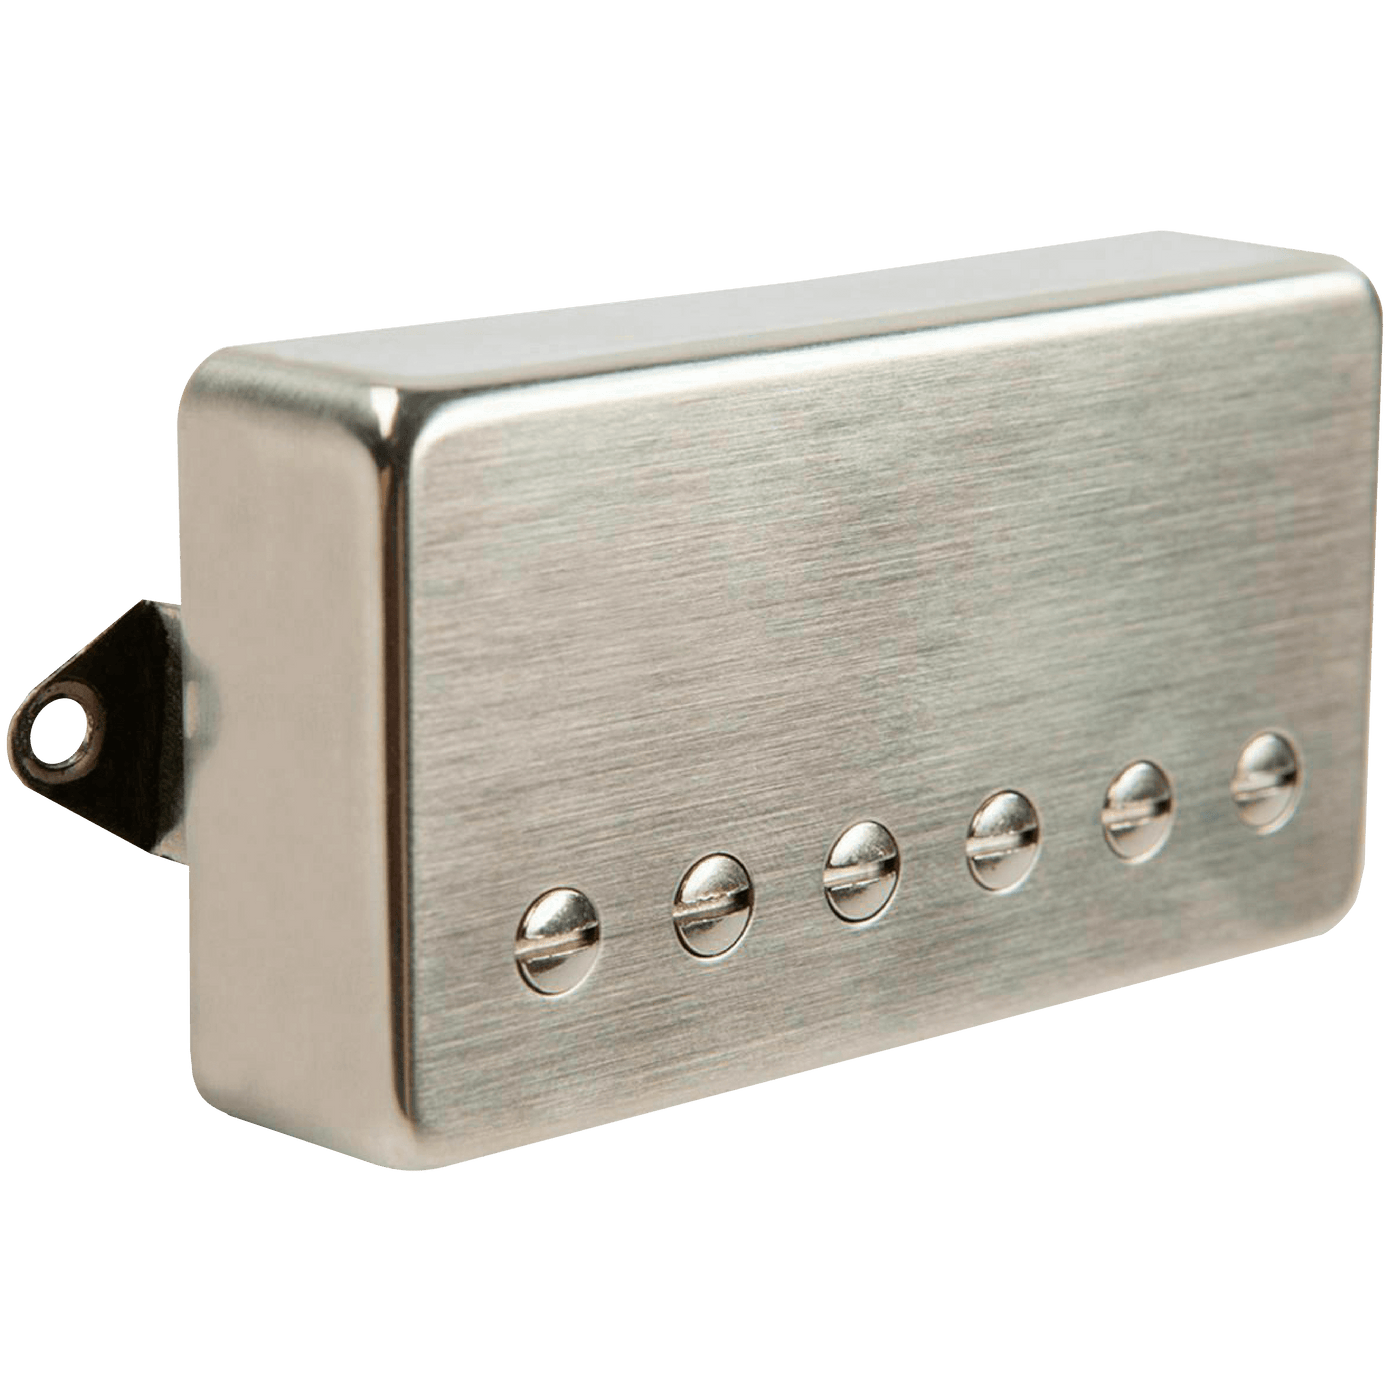 Suhr Asatobucker Humbucker Nickel Chrome (Bridge) - $189990 - Gearhub - Mateus Asato has established himself as one of the most melodic and inspirational guitar players in the world today. His collaboration with John Suhr has resulted in the all-new Asatobucker®, a vintage-inspired bridge humbucker with superb warmth and touch sensitivity. Alnico IV magnets are used to create the soft and sweet attack that is the quintessential Mateus sound. Spacing • 53mm DC Resistance • 9.2K Ω Hook Up Wire • 4-Conductor W